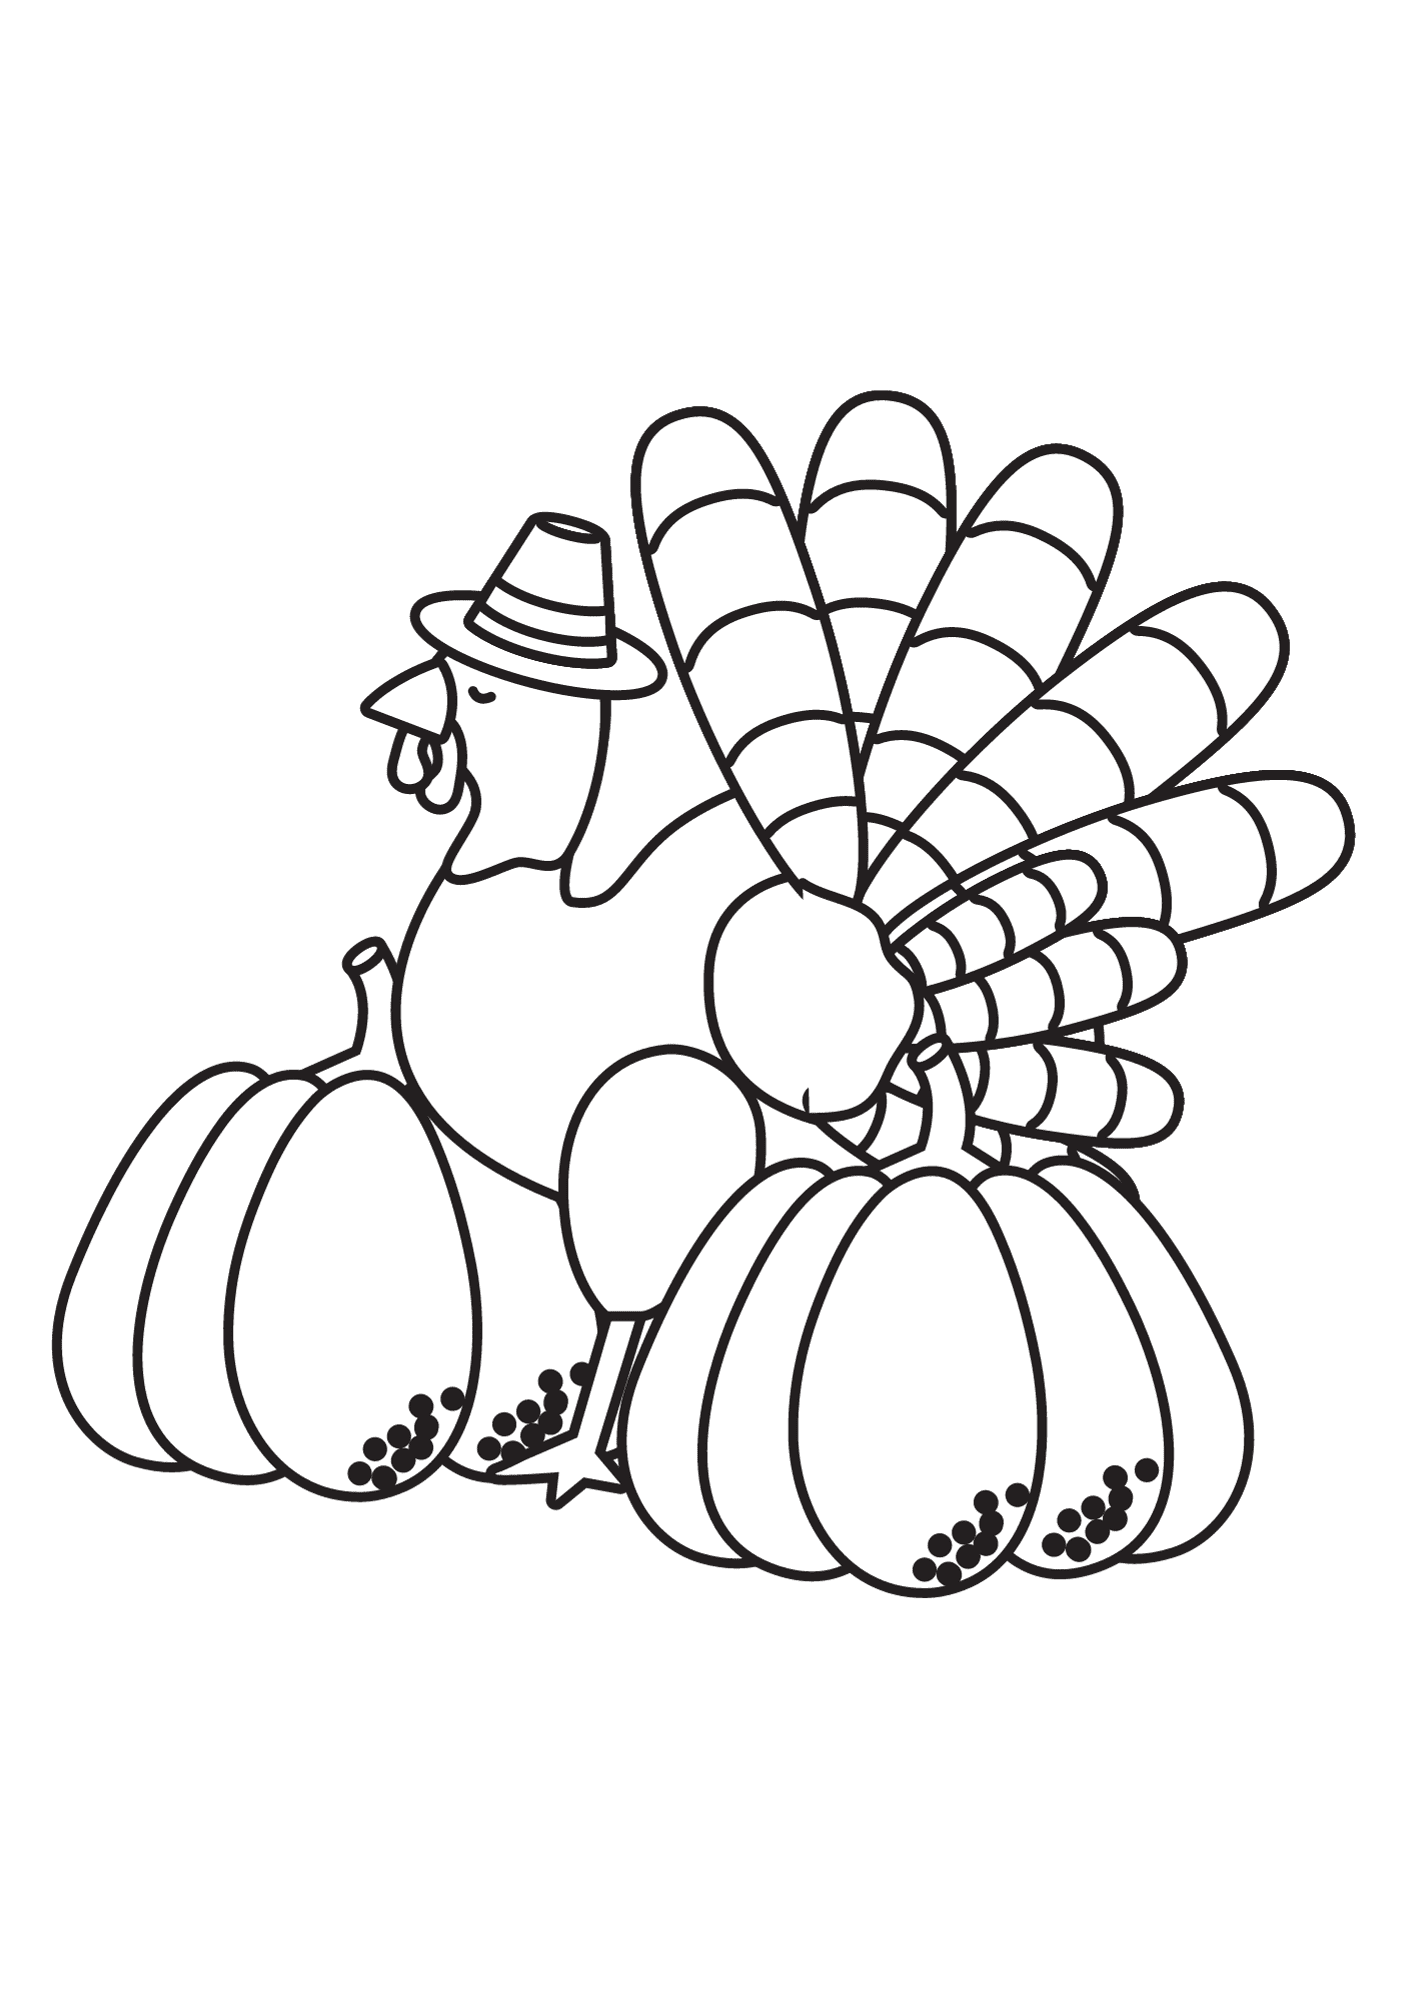 Thanksgiving Outline Coloring Page